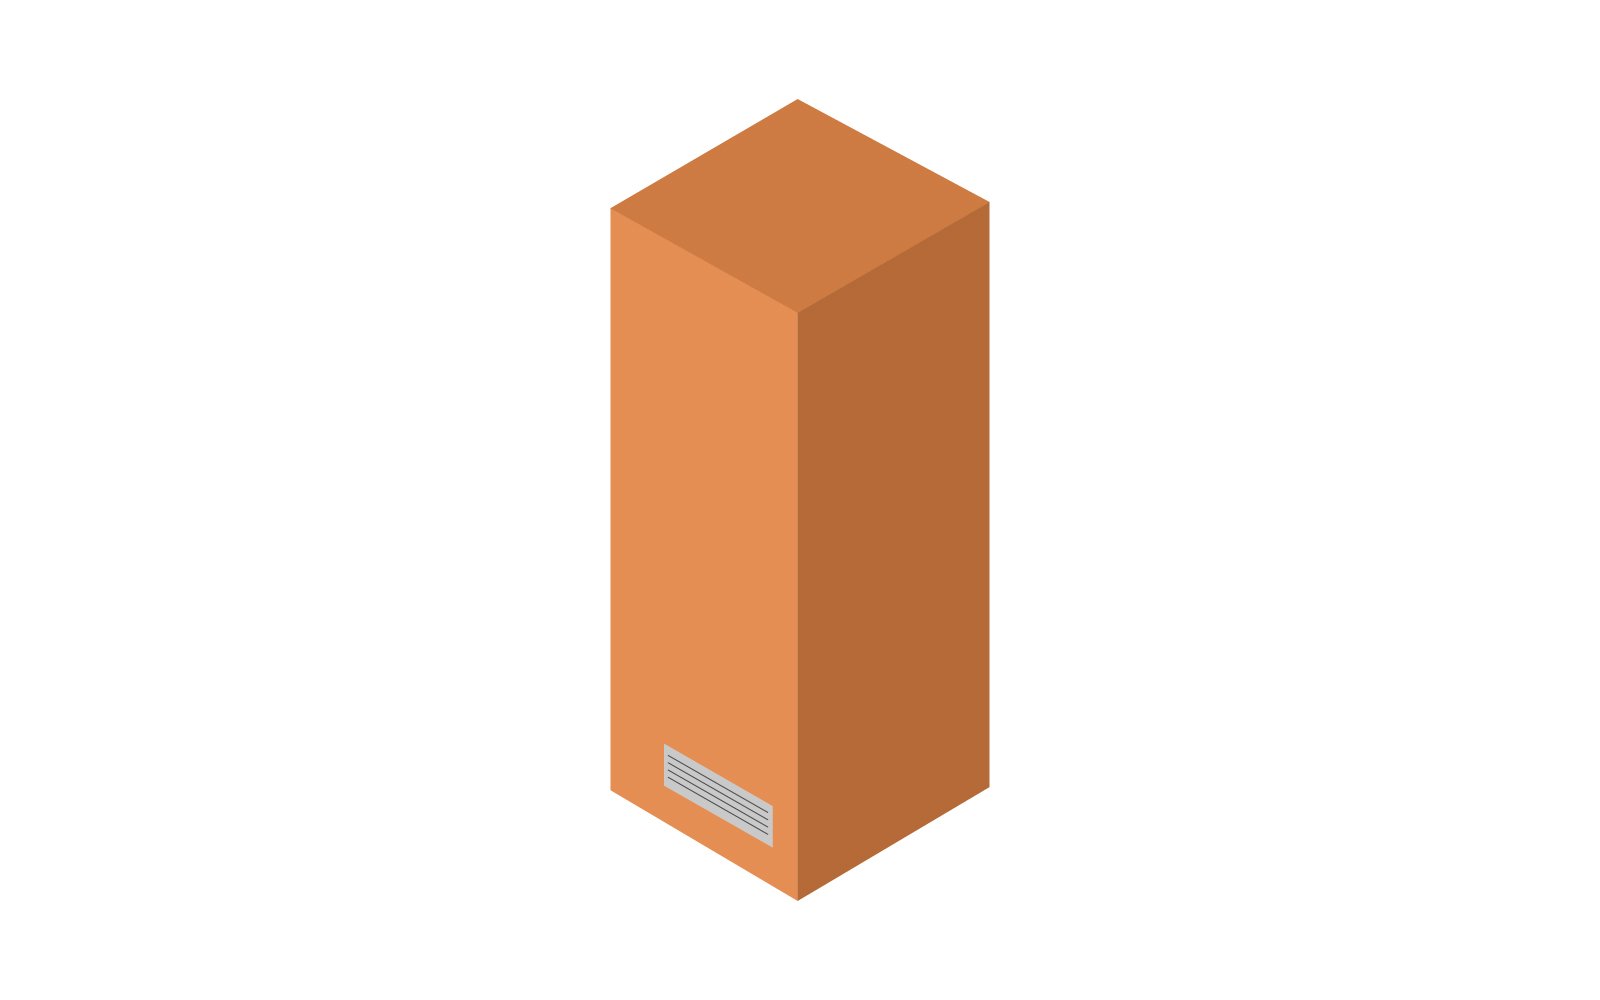 Isometric box on a light brown background